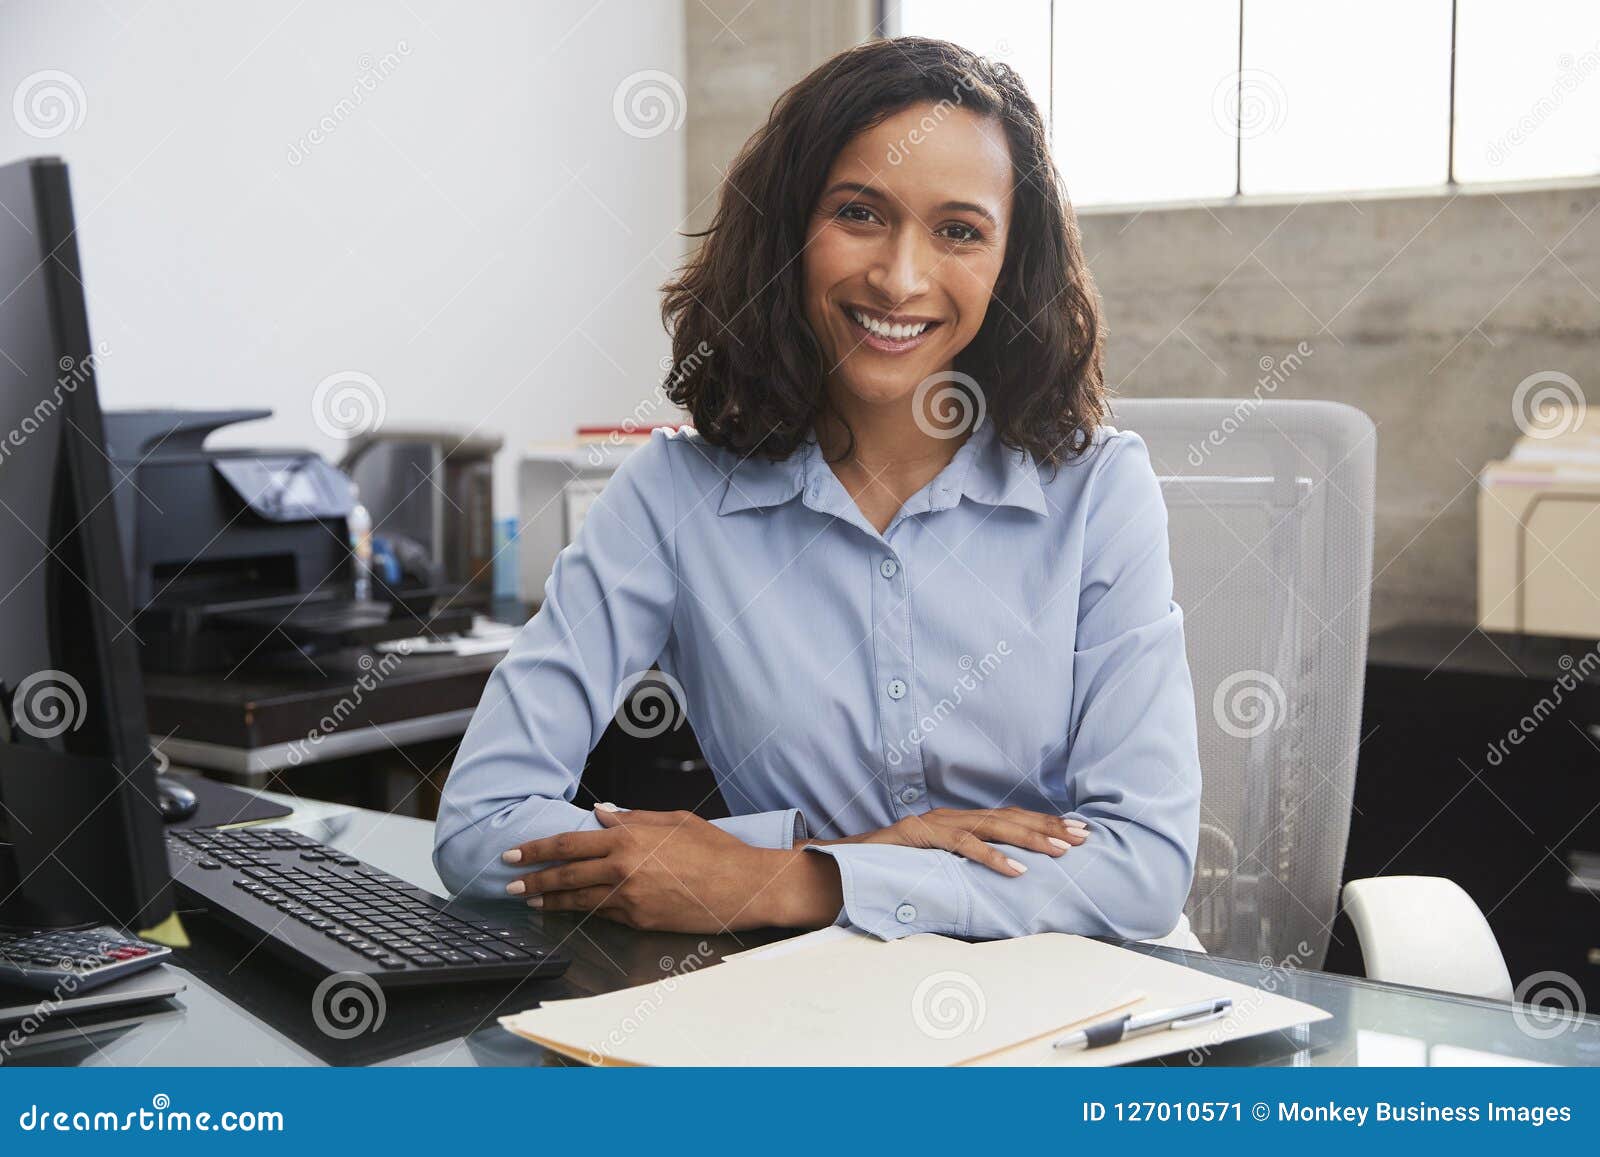 young female professional at desk smiling to camera